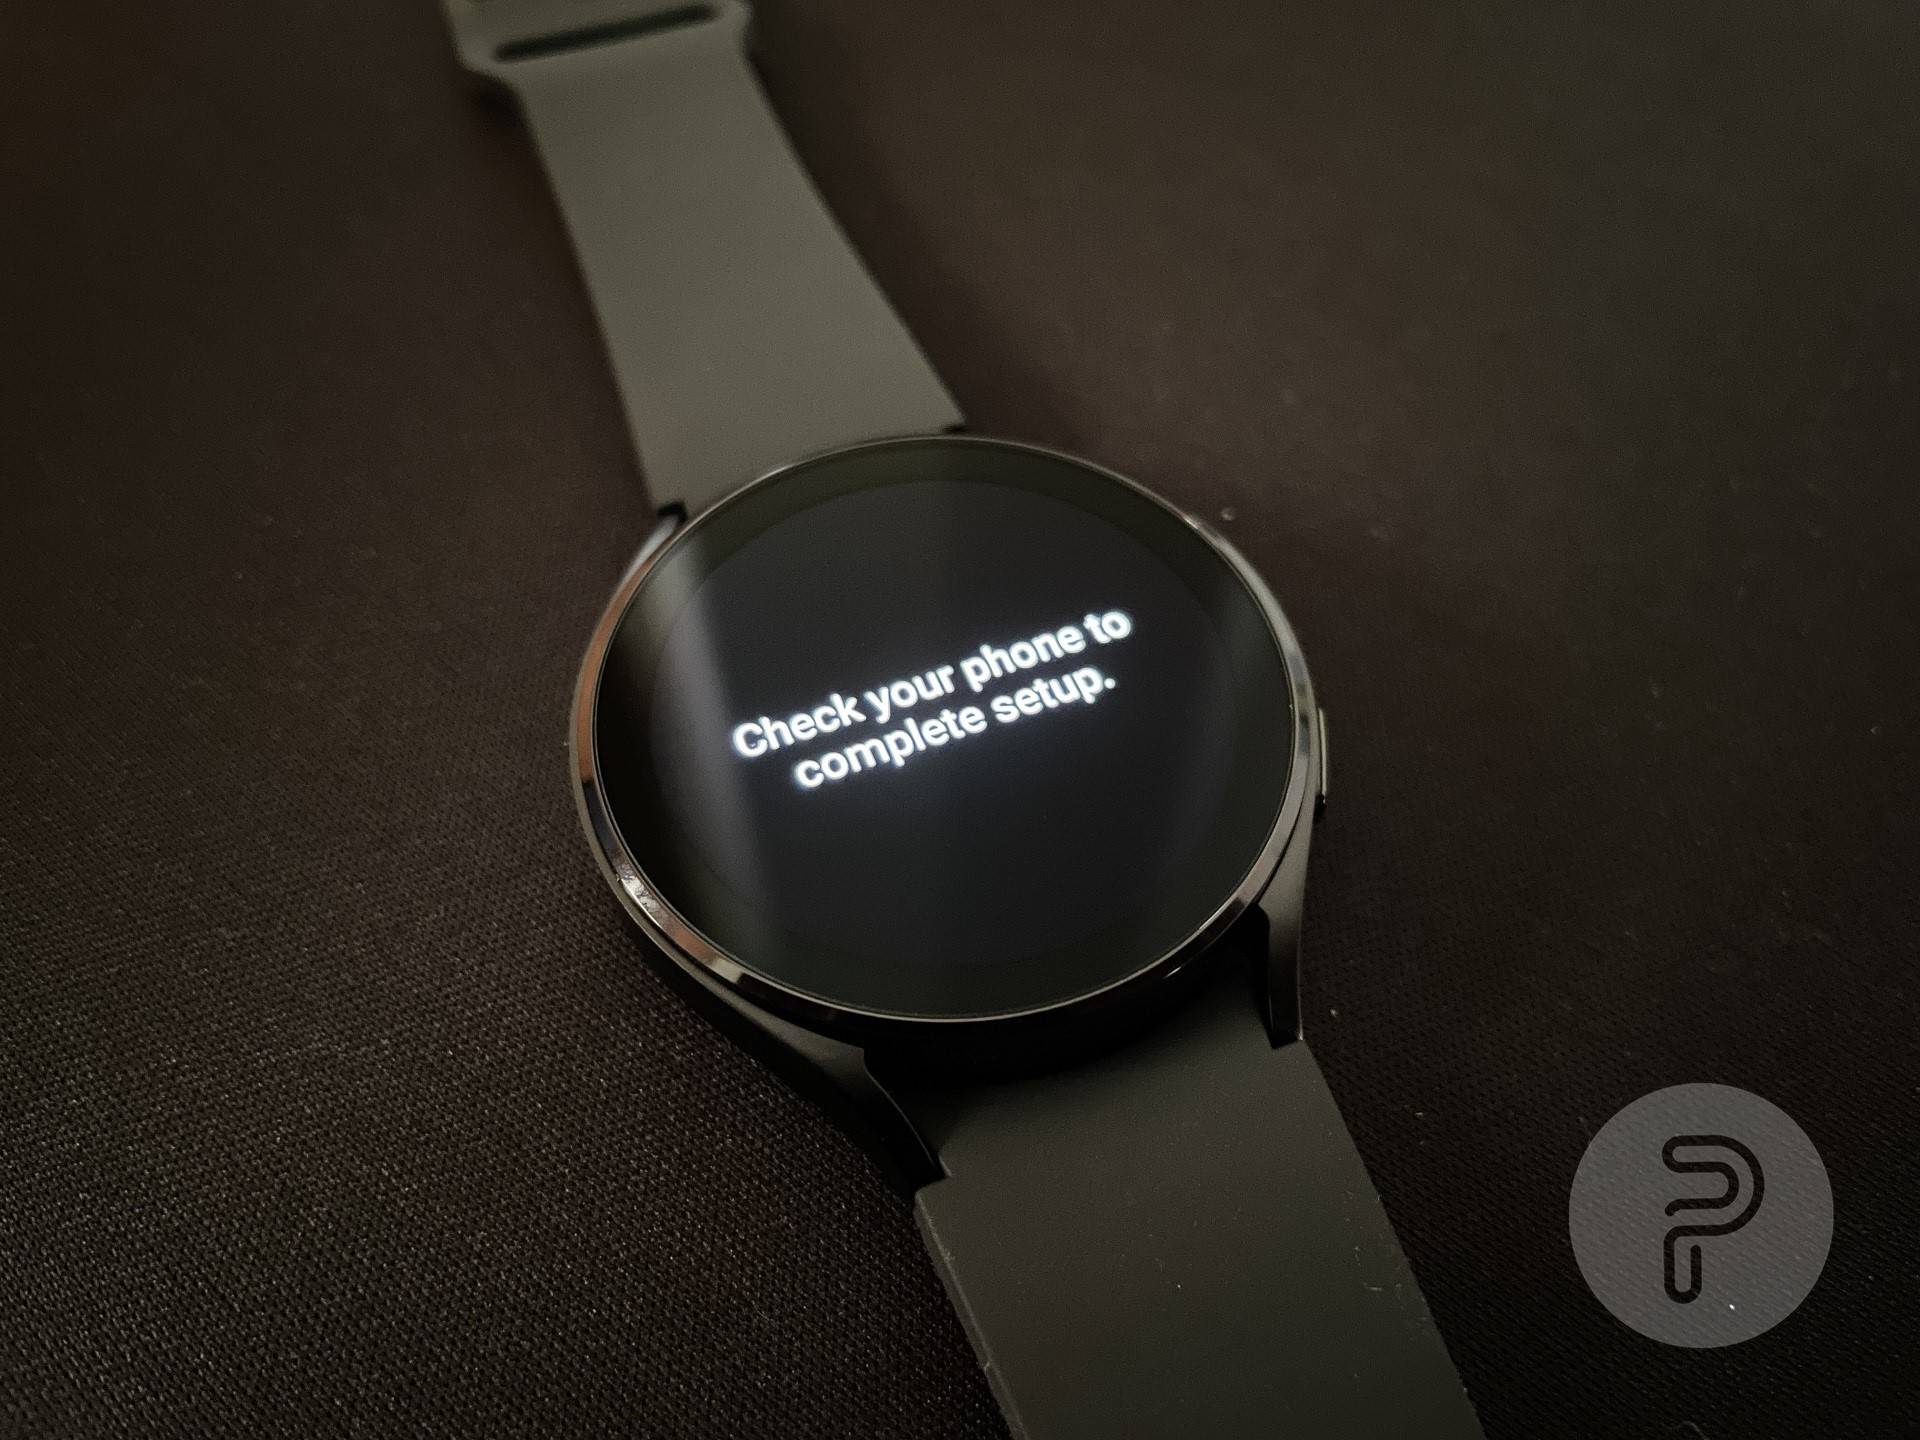 Galaxy Watch 4 placed on a mat with a setup step displayed on the screen